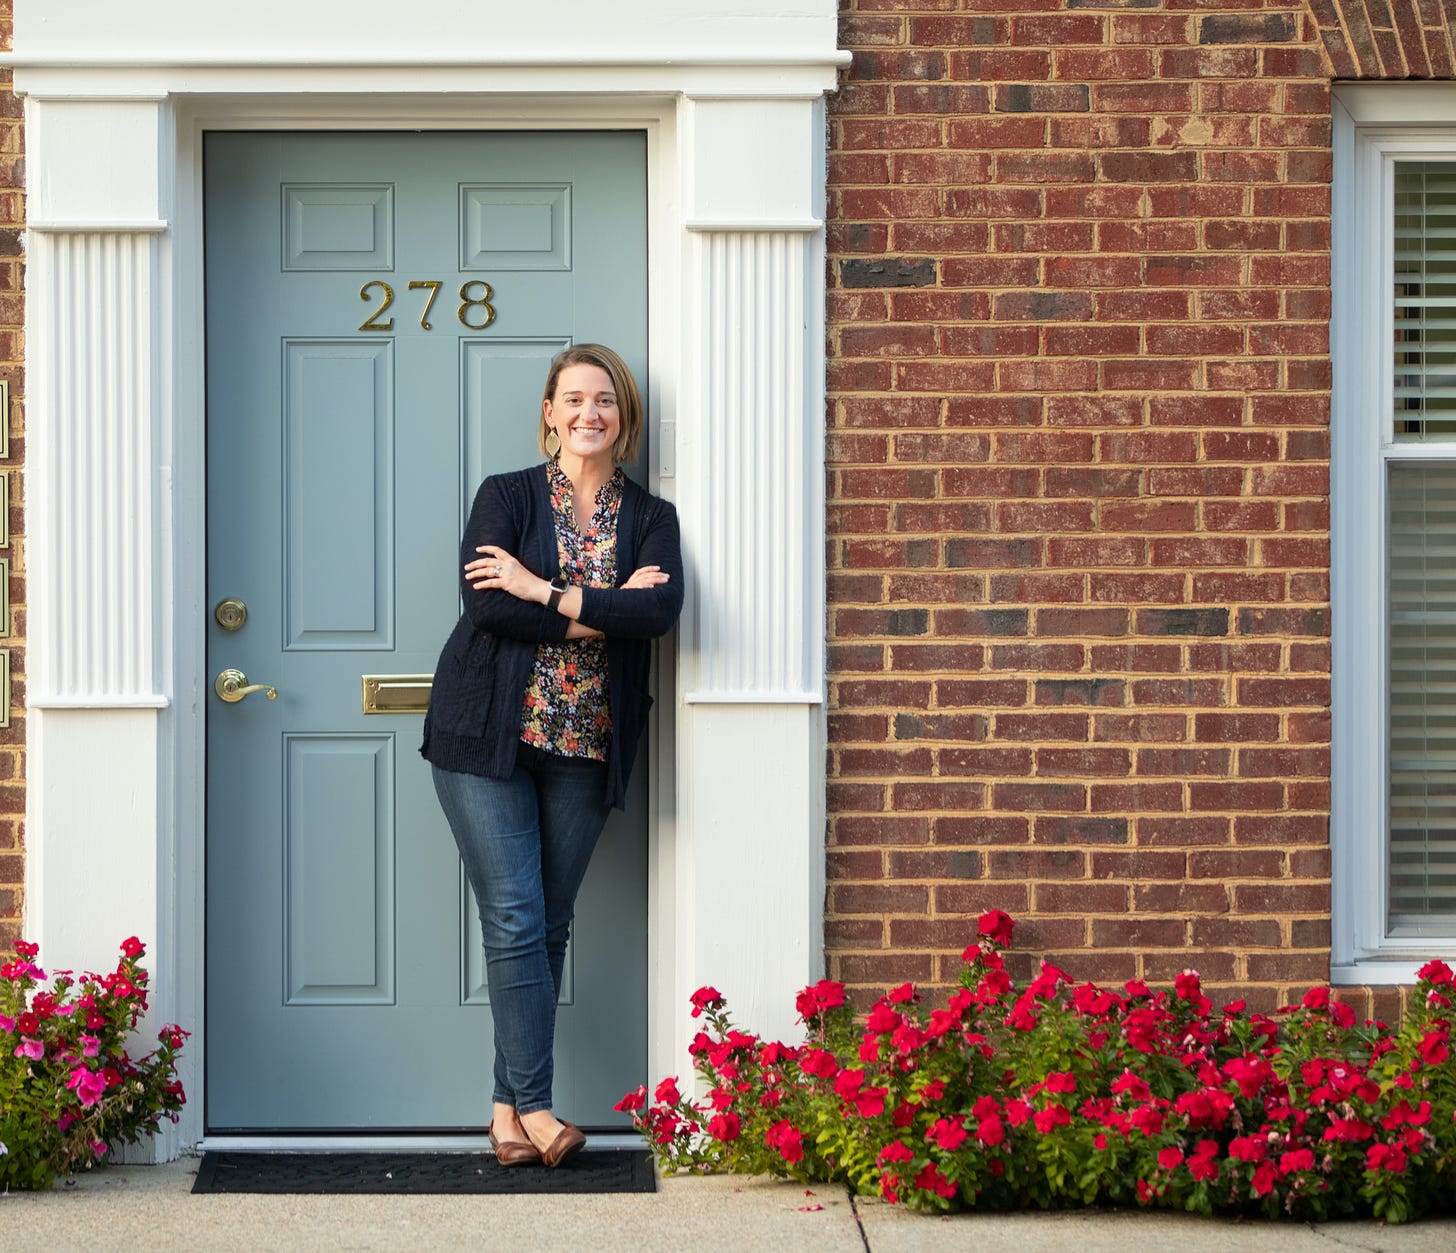 Dr. Emily standing outside her office smiling in front of a light blue door and pink flowers